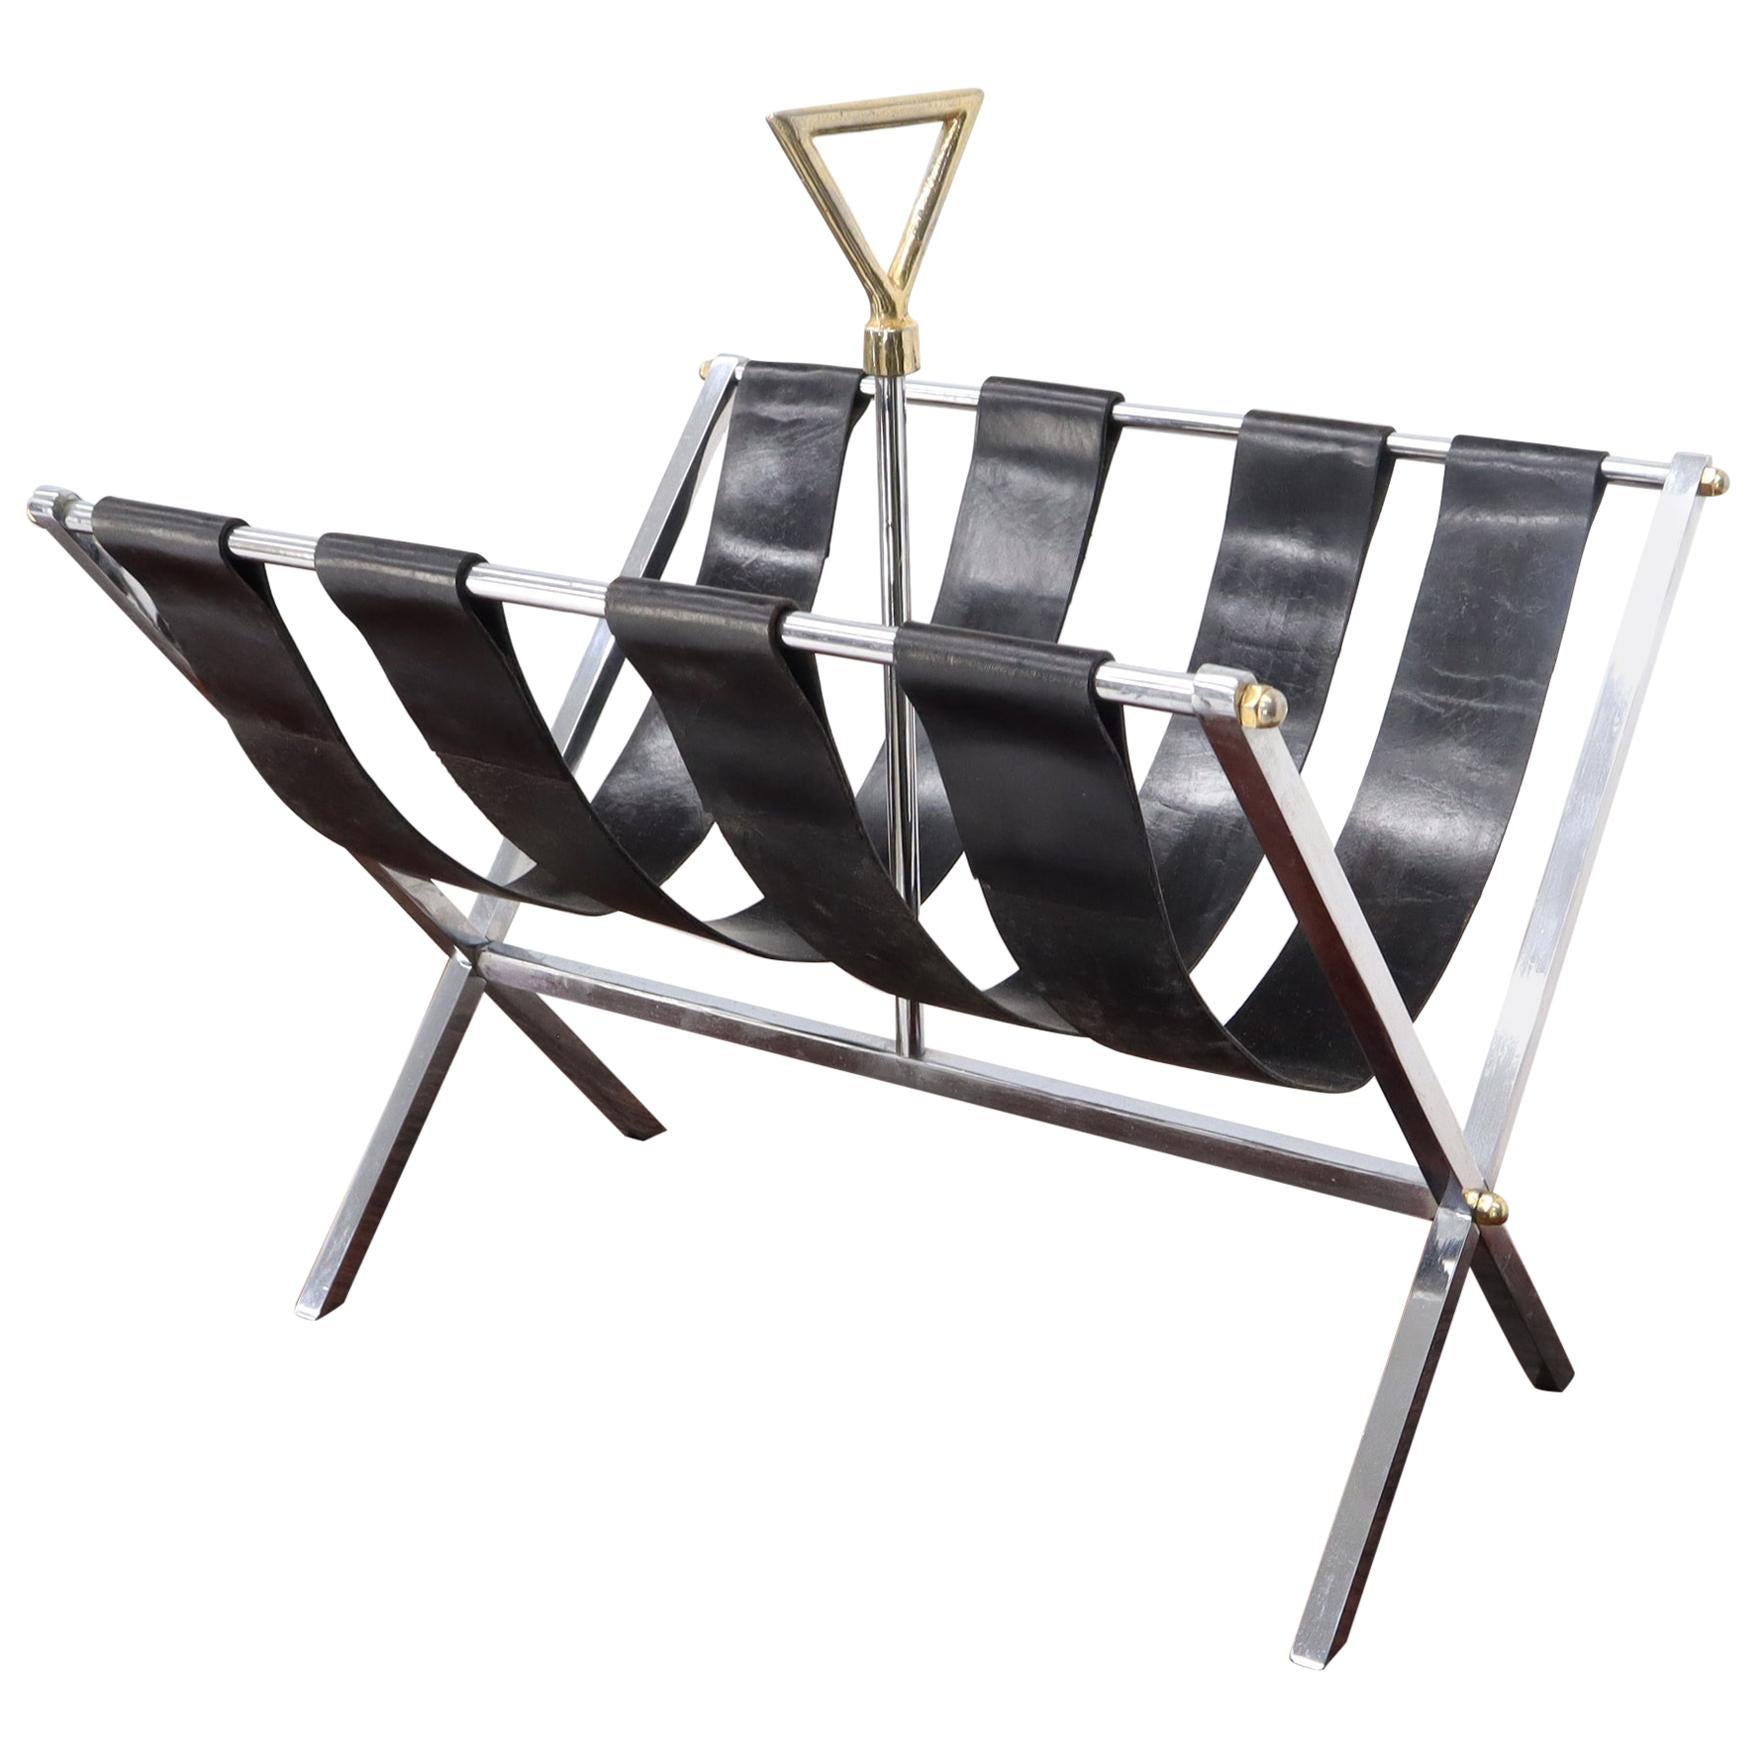 Machined Chrome Bar X Base Brass Nuts and Leather Belts Magazine Rack Shelf For Sale